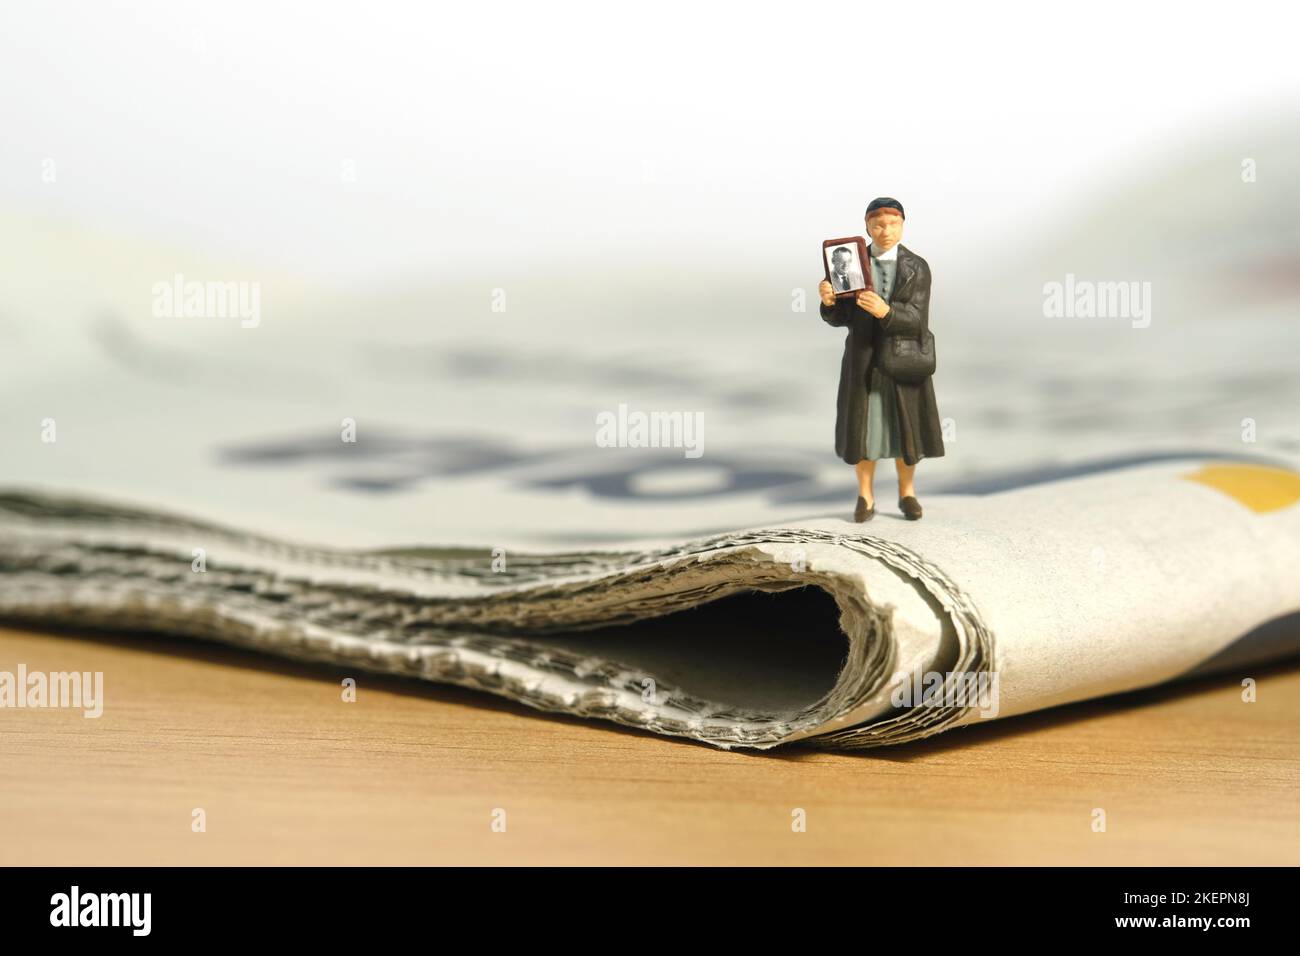 Miniature people toy figure photography. A woman holding photo frame, searching missing person because of war conflict above newspaper. Image photo Stock Photo